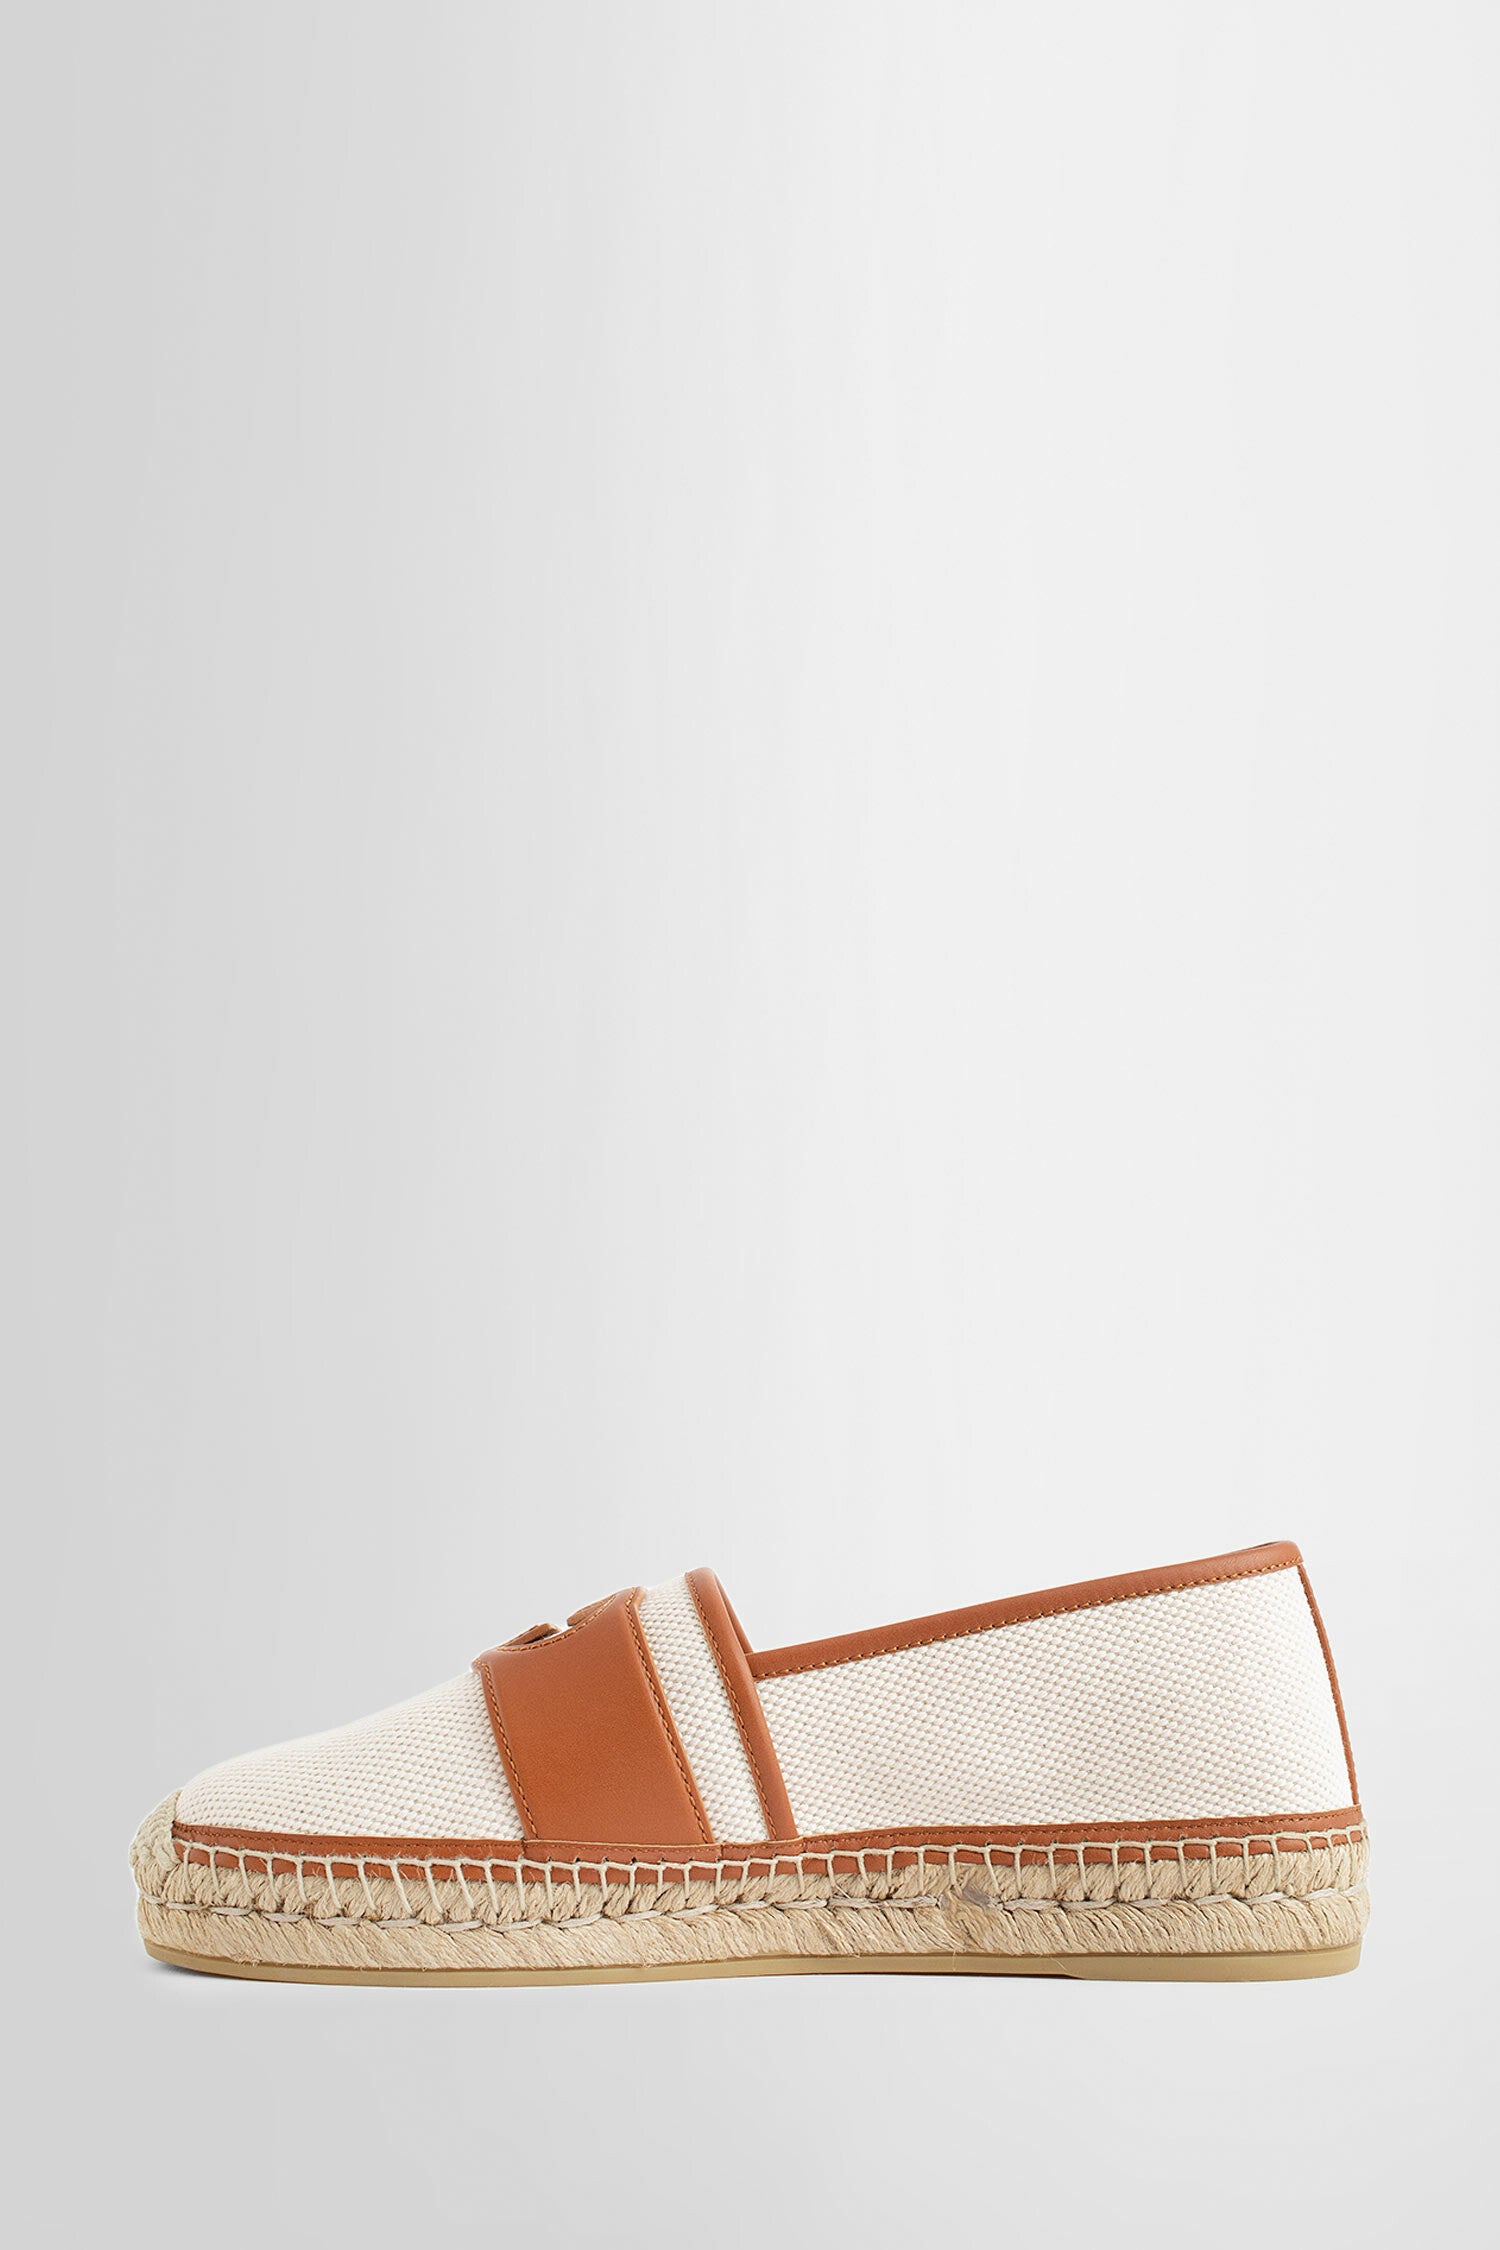 GUCCI MAN OFF-WHITE LOAFERS & FLATS